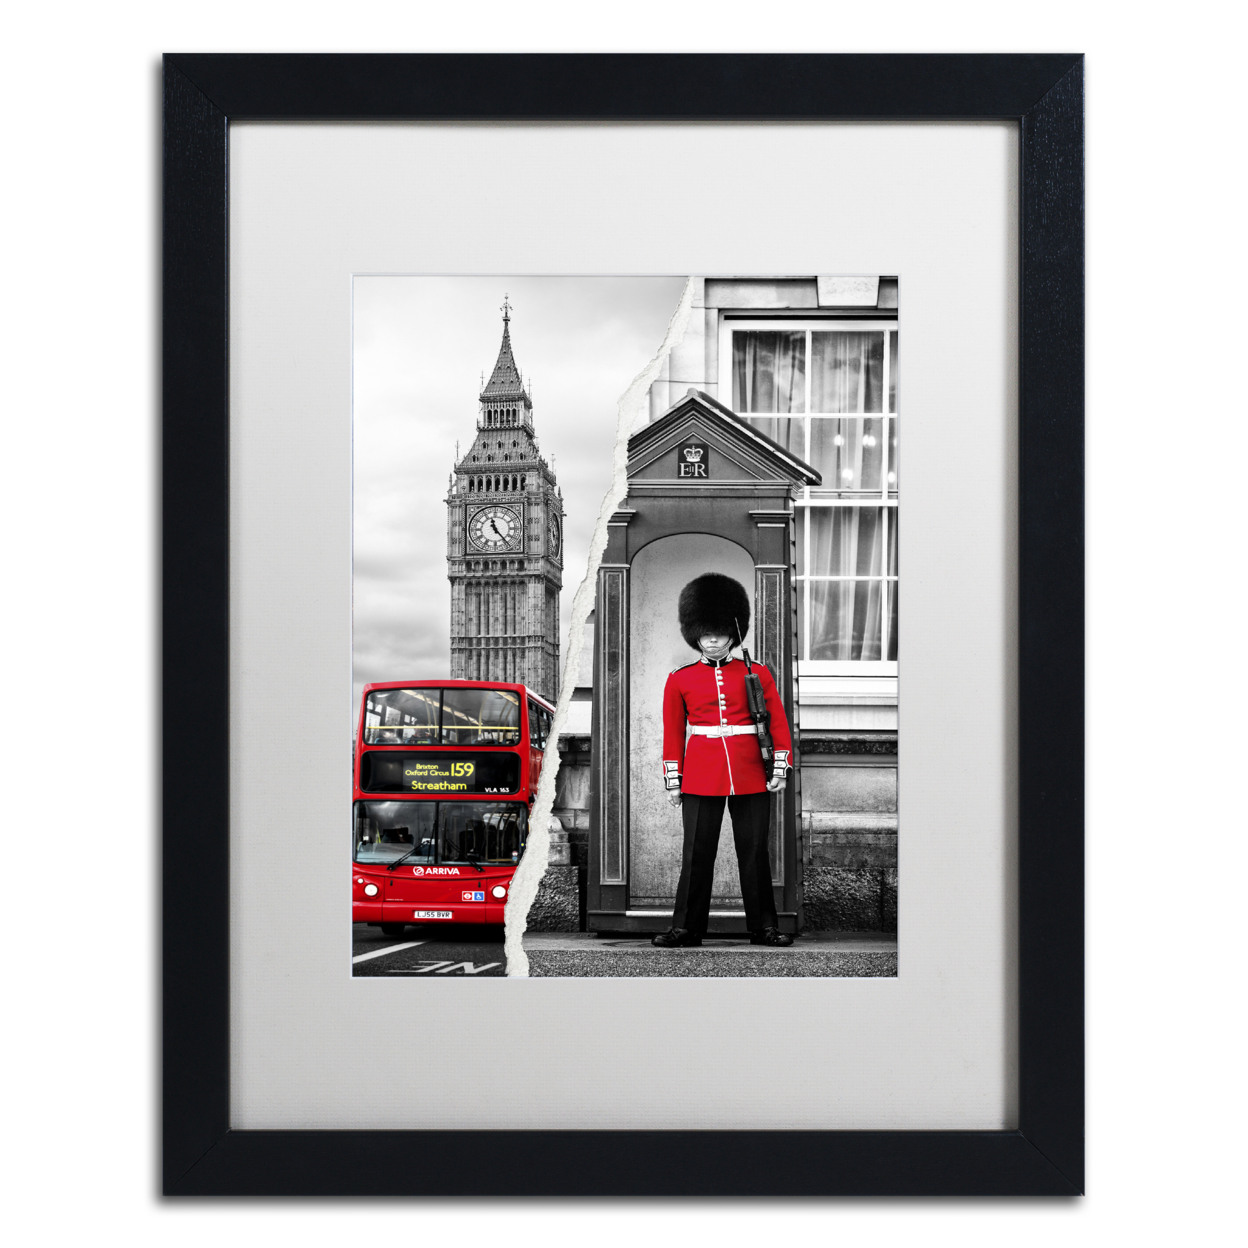 Philippe Hugonnard 'Look At London' Black Wooden Framed Art 18 X 22 Inches